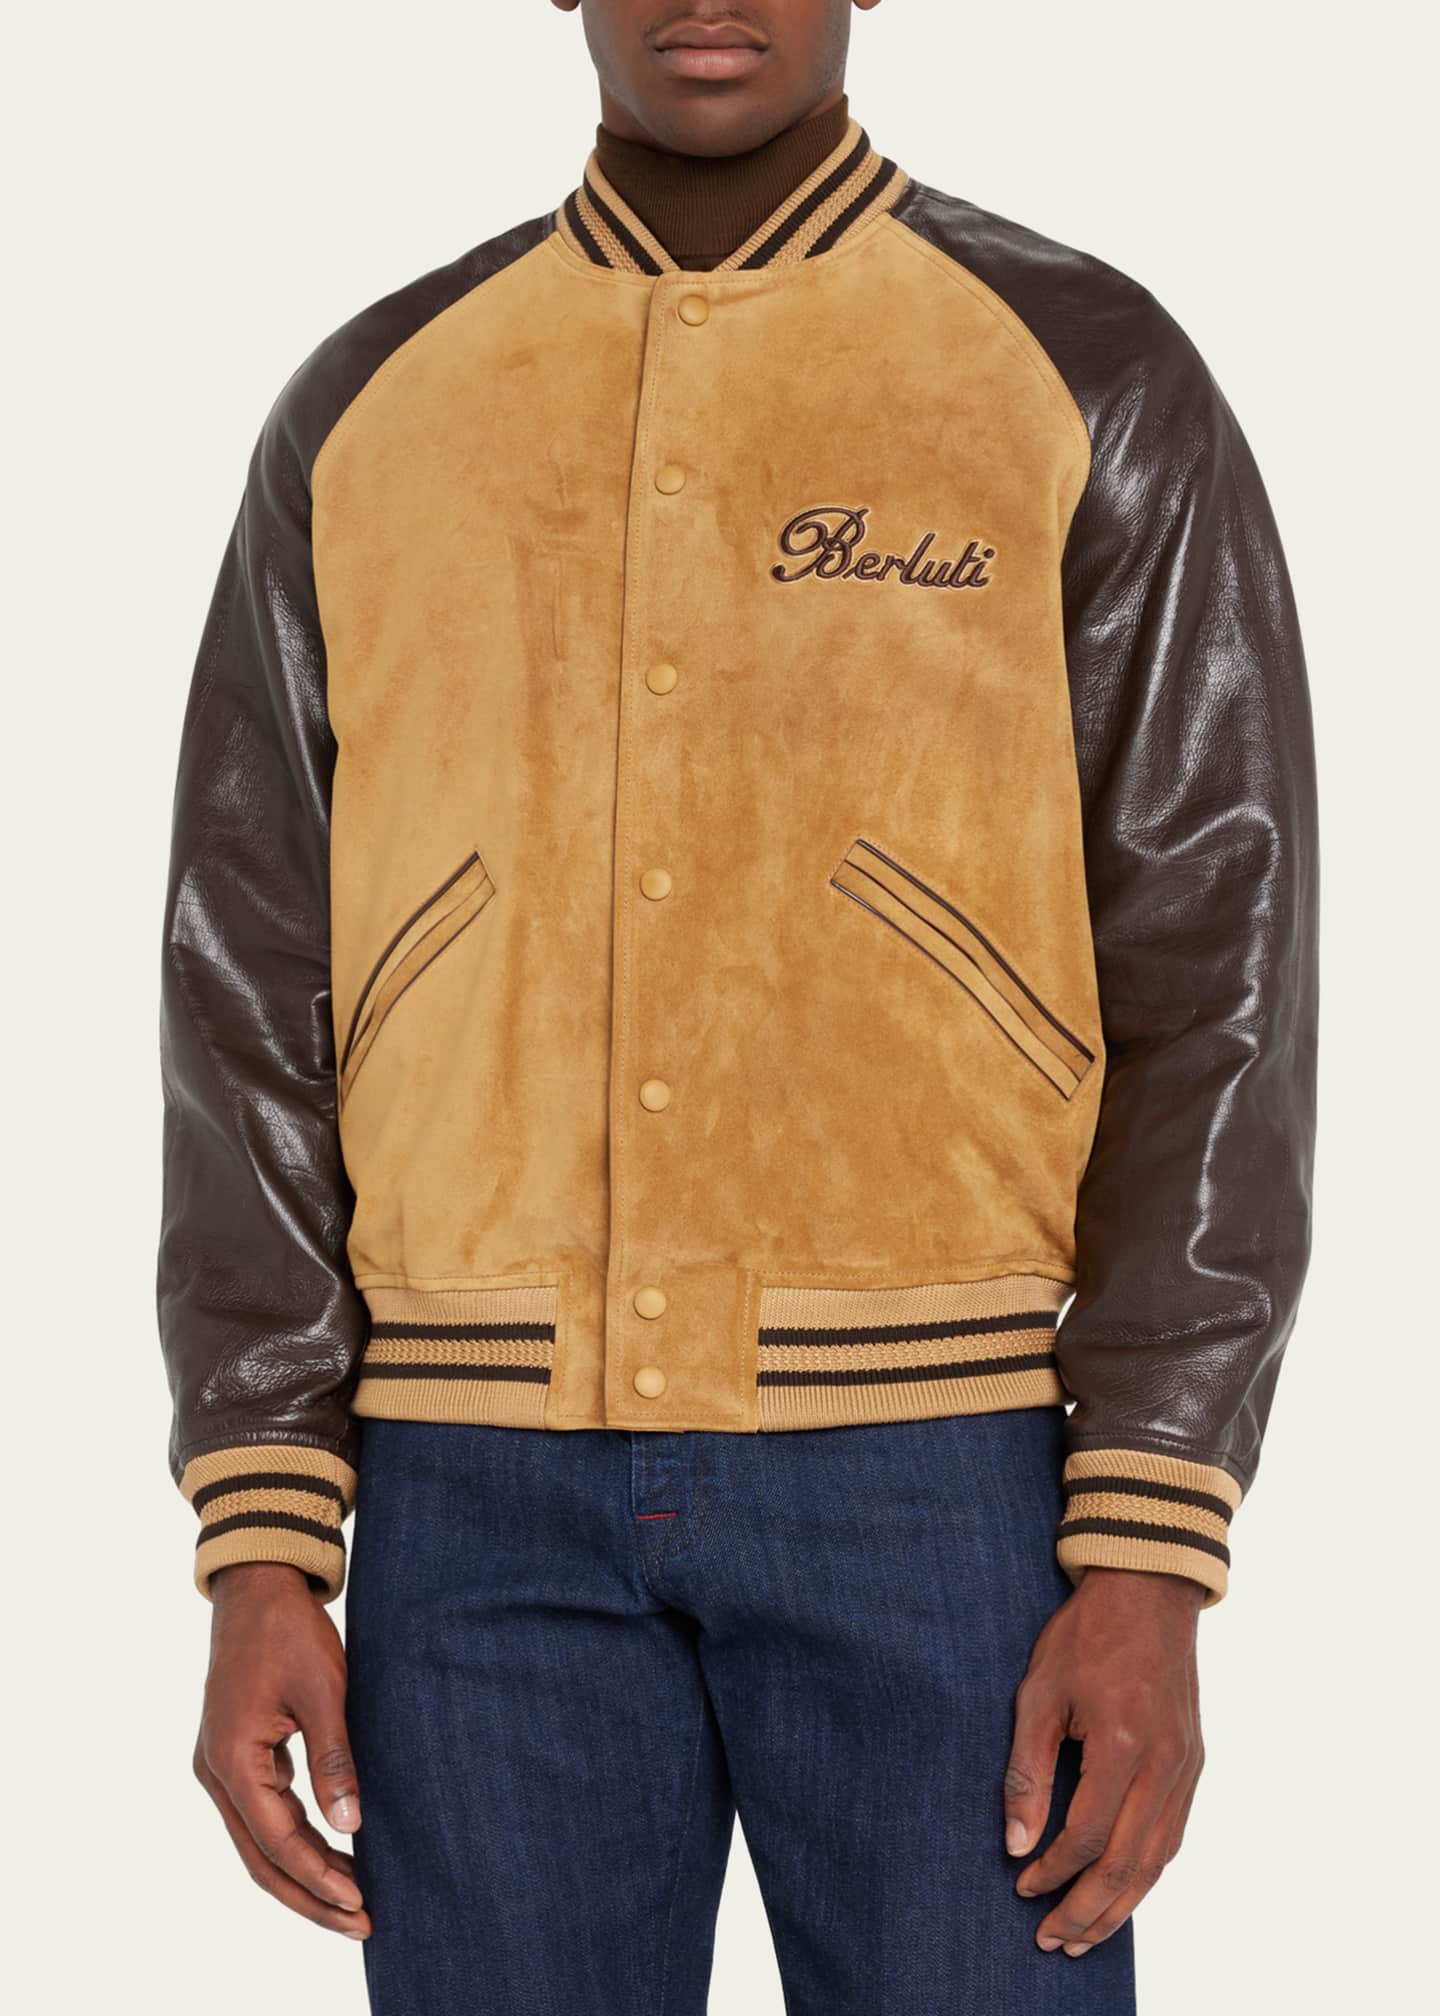 Berluti Suede Leather Varsity Jacket in Natural for Men